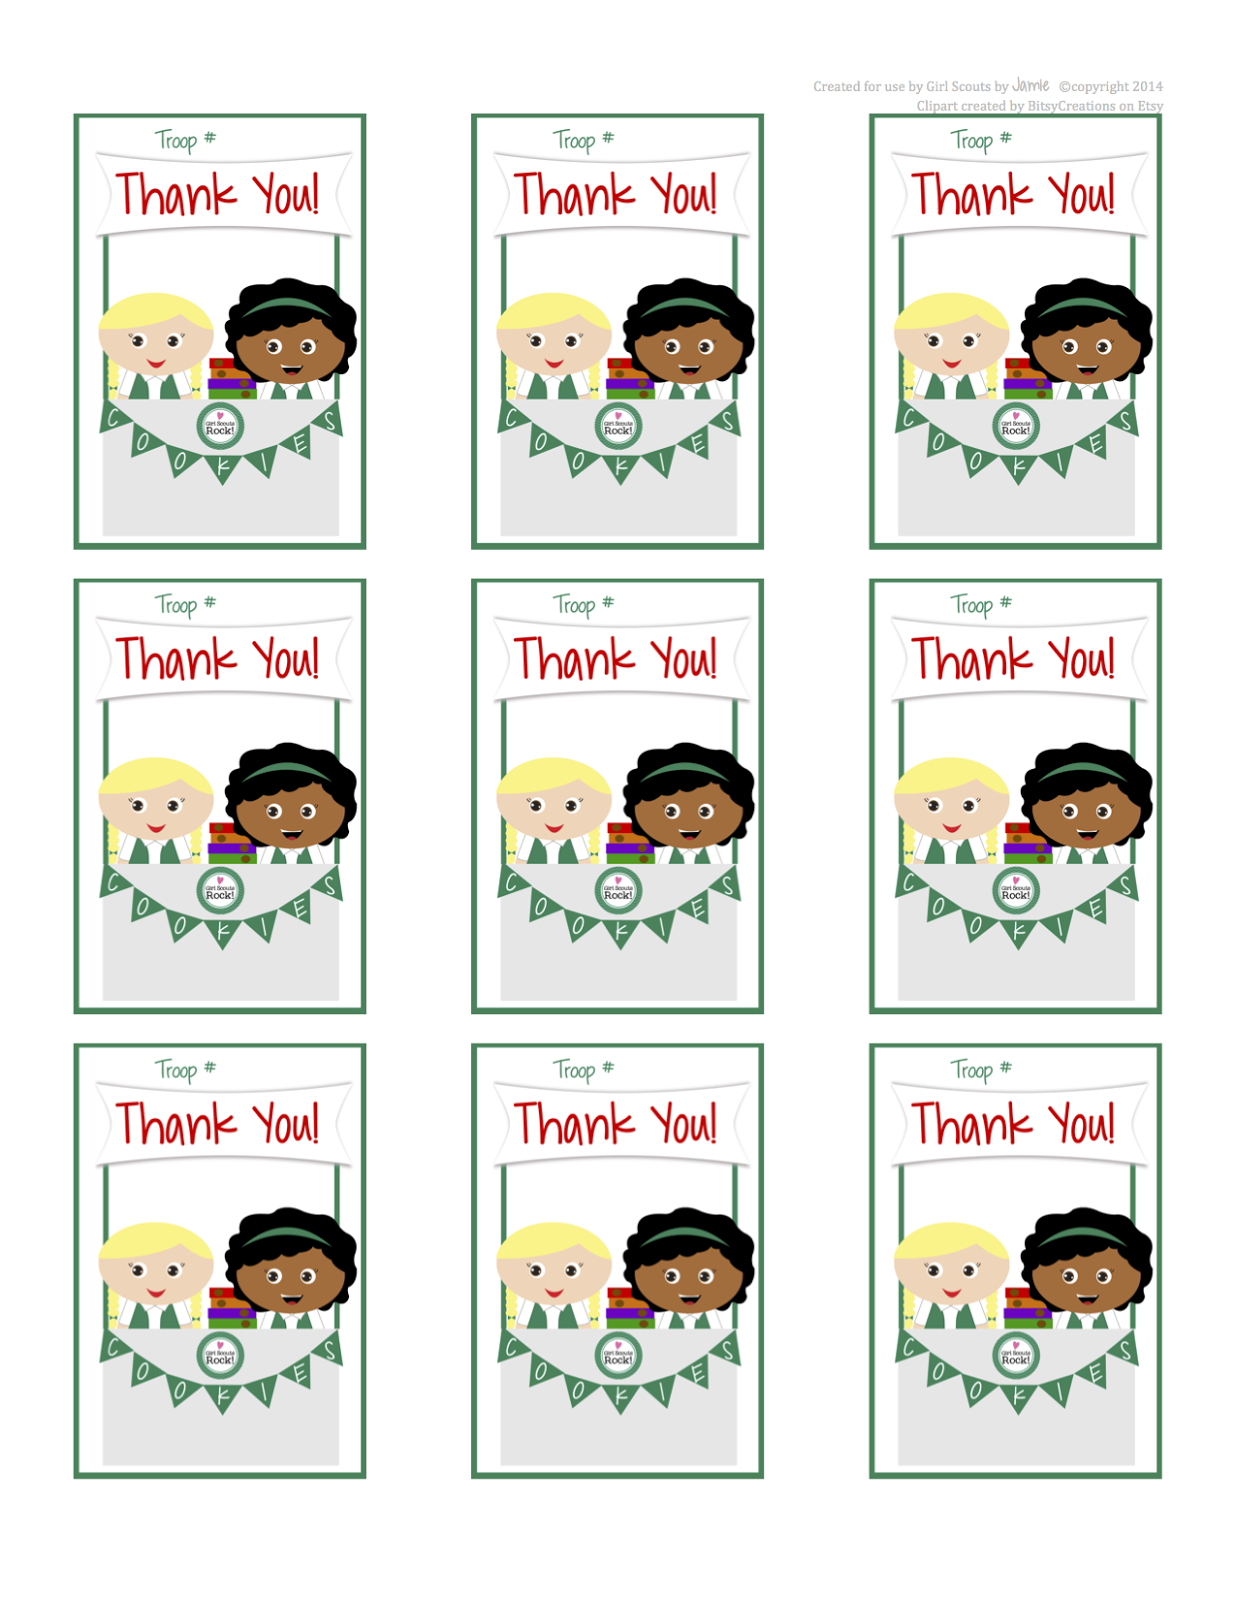 Girl Scout Junior Clipart Here Are Some Free Printable Thank You Cards